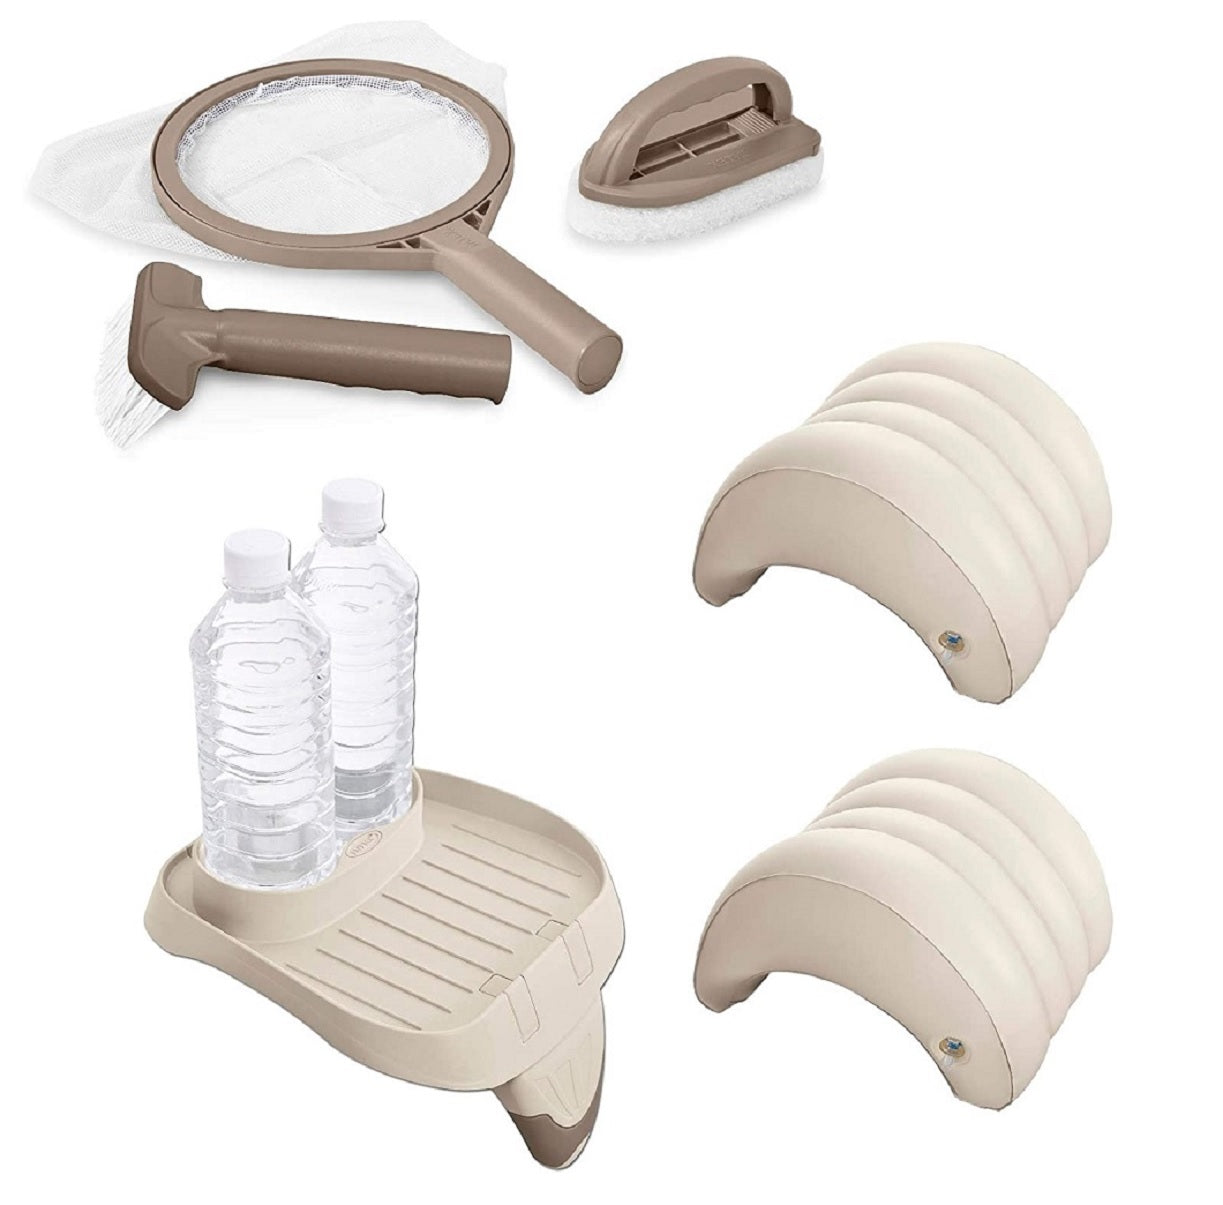 Intex PureSpa Maintenance Kit Cup Holder with Tray & Inflatable Spa Headrest (2 Pack)